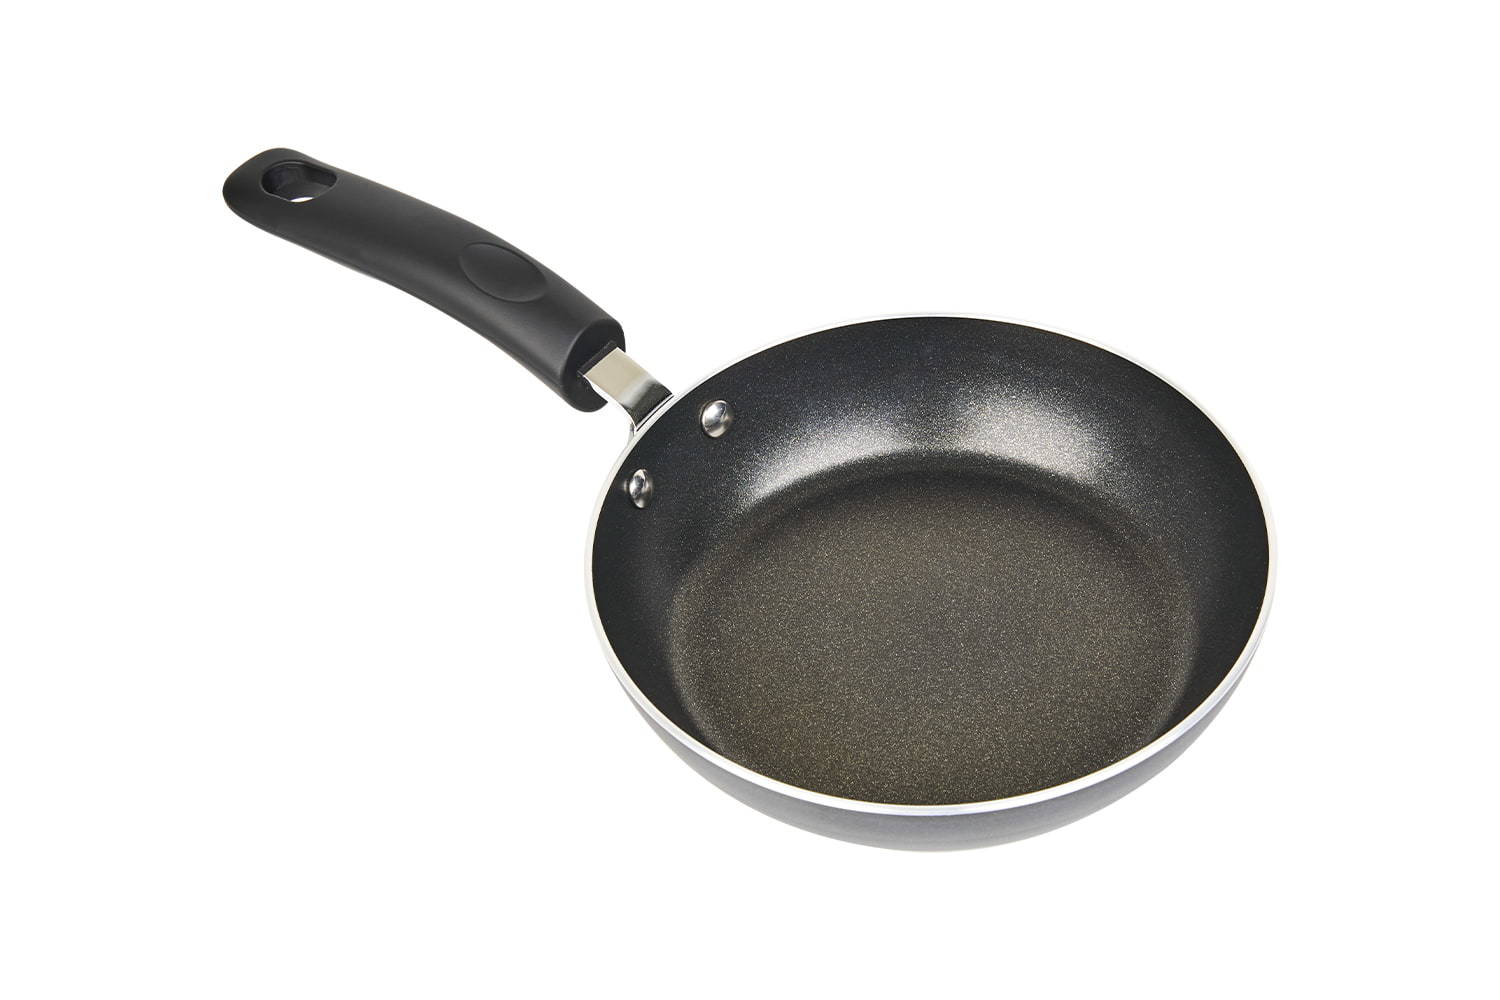 26 Frying pan (pot height 5.3CM), Diamond coating, non stick coating, frying, common in family kitchen